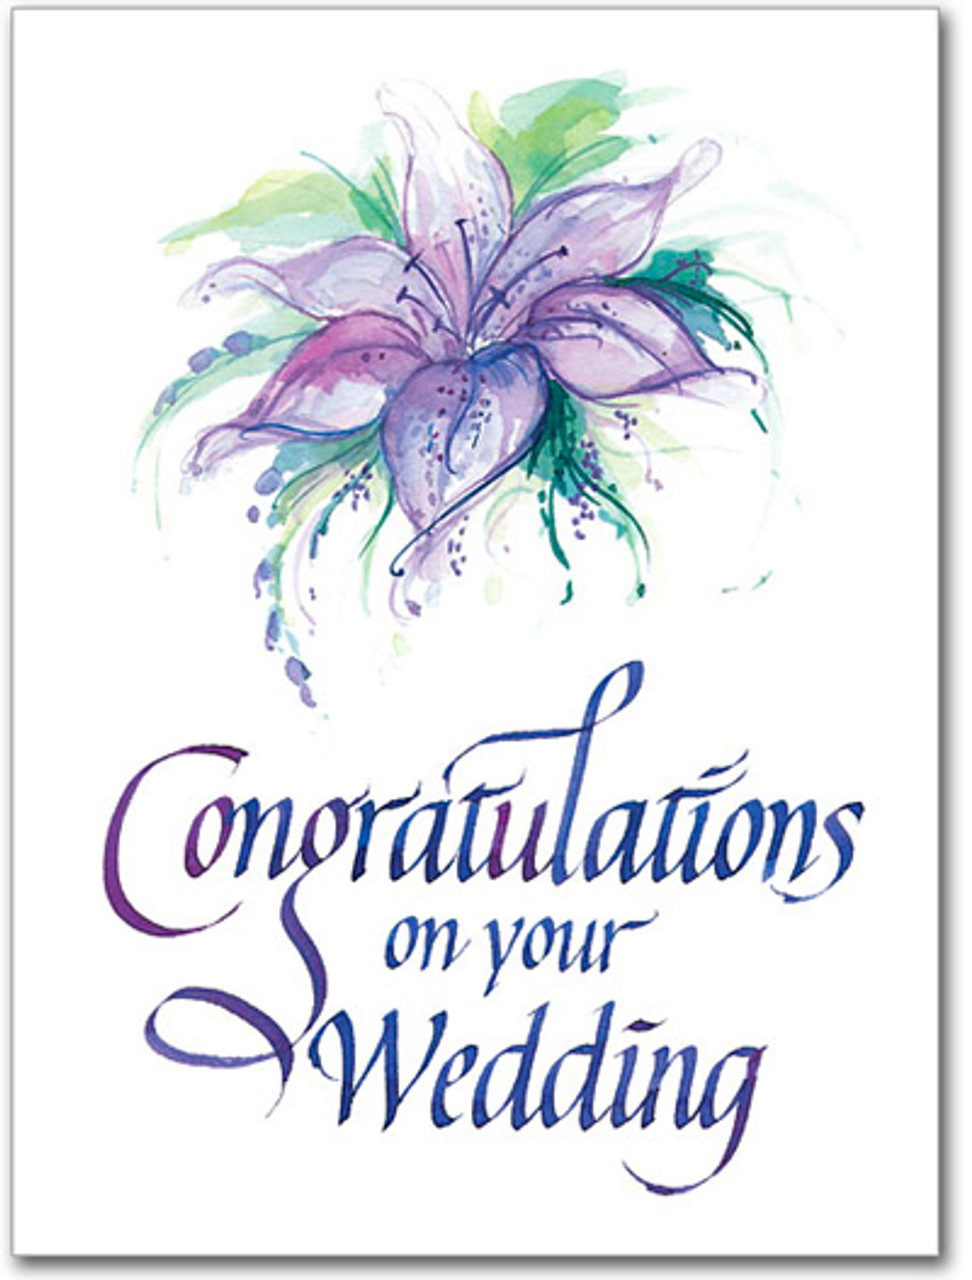 sisters-of-carmel-congratulations-on-your-wedding-greeting-card